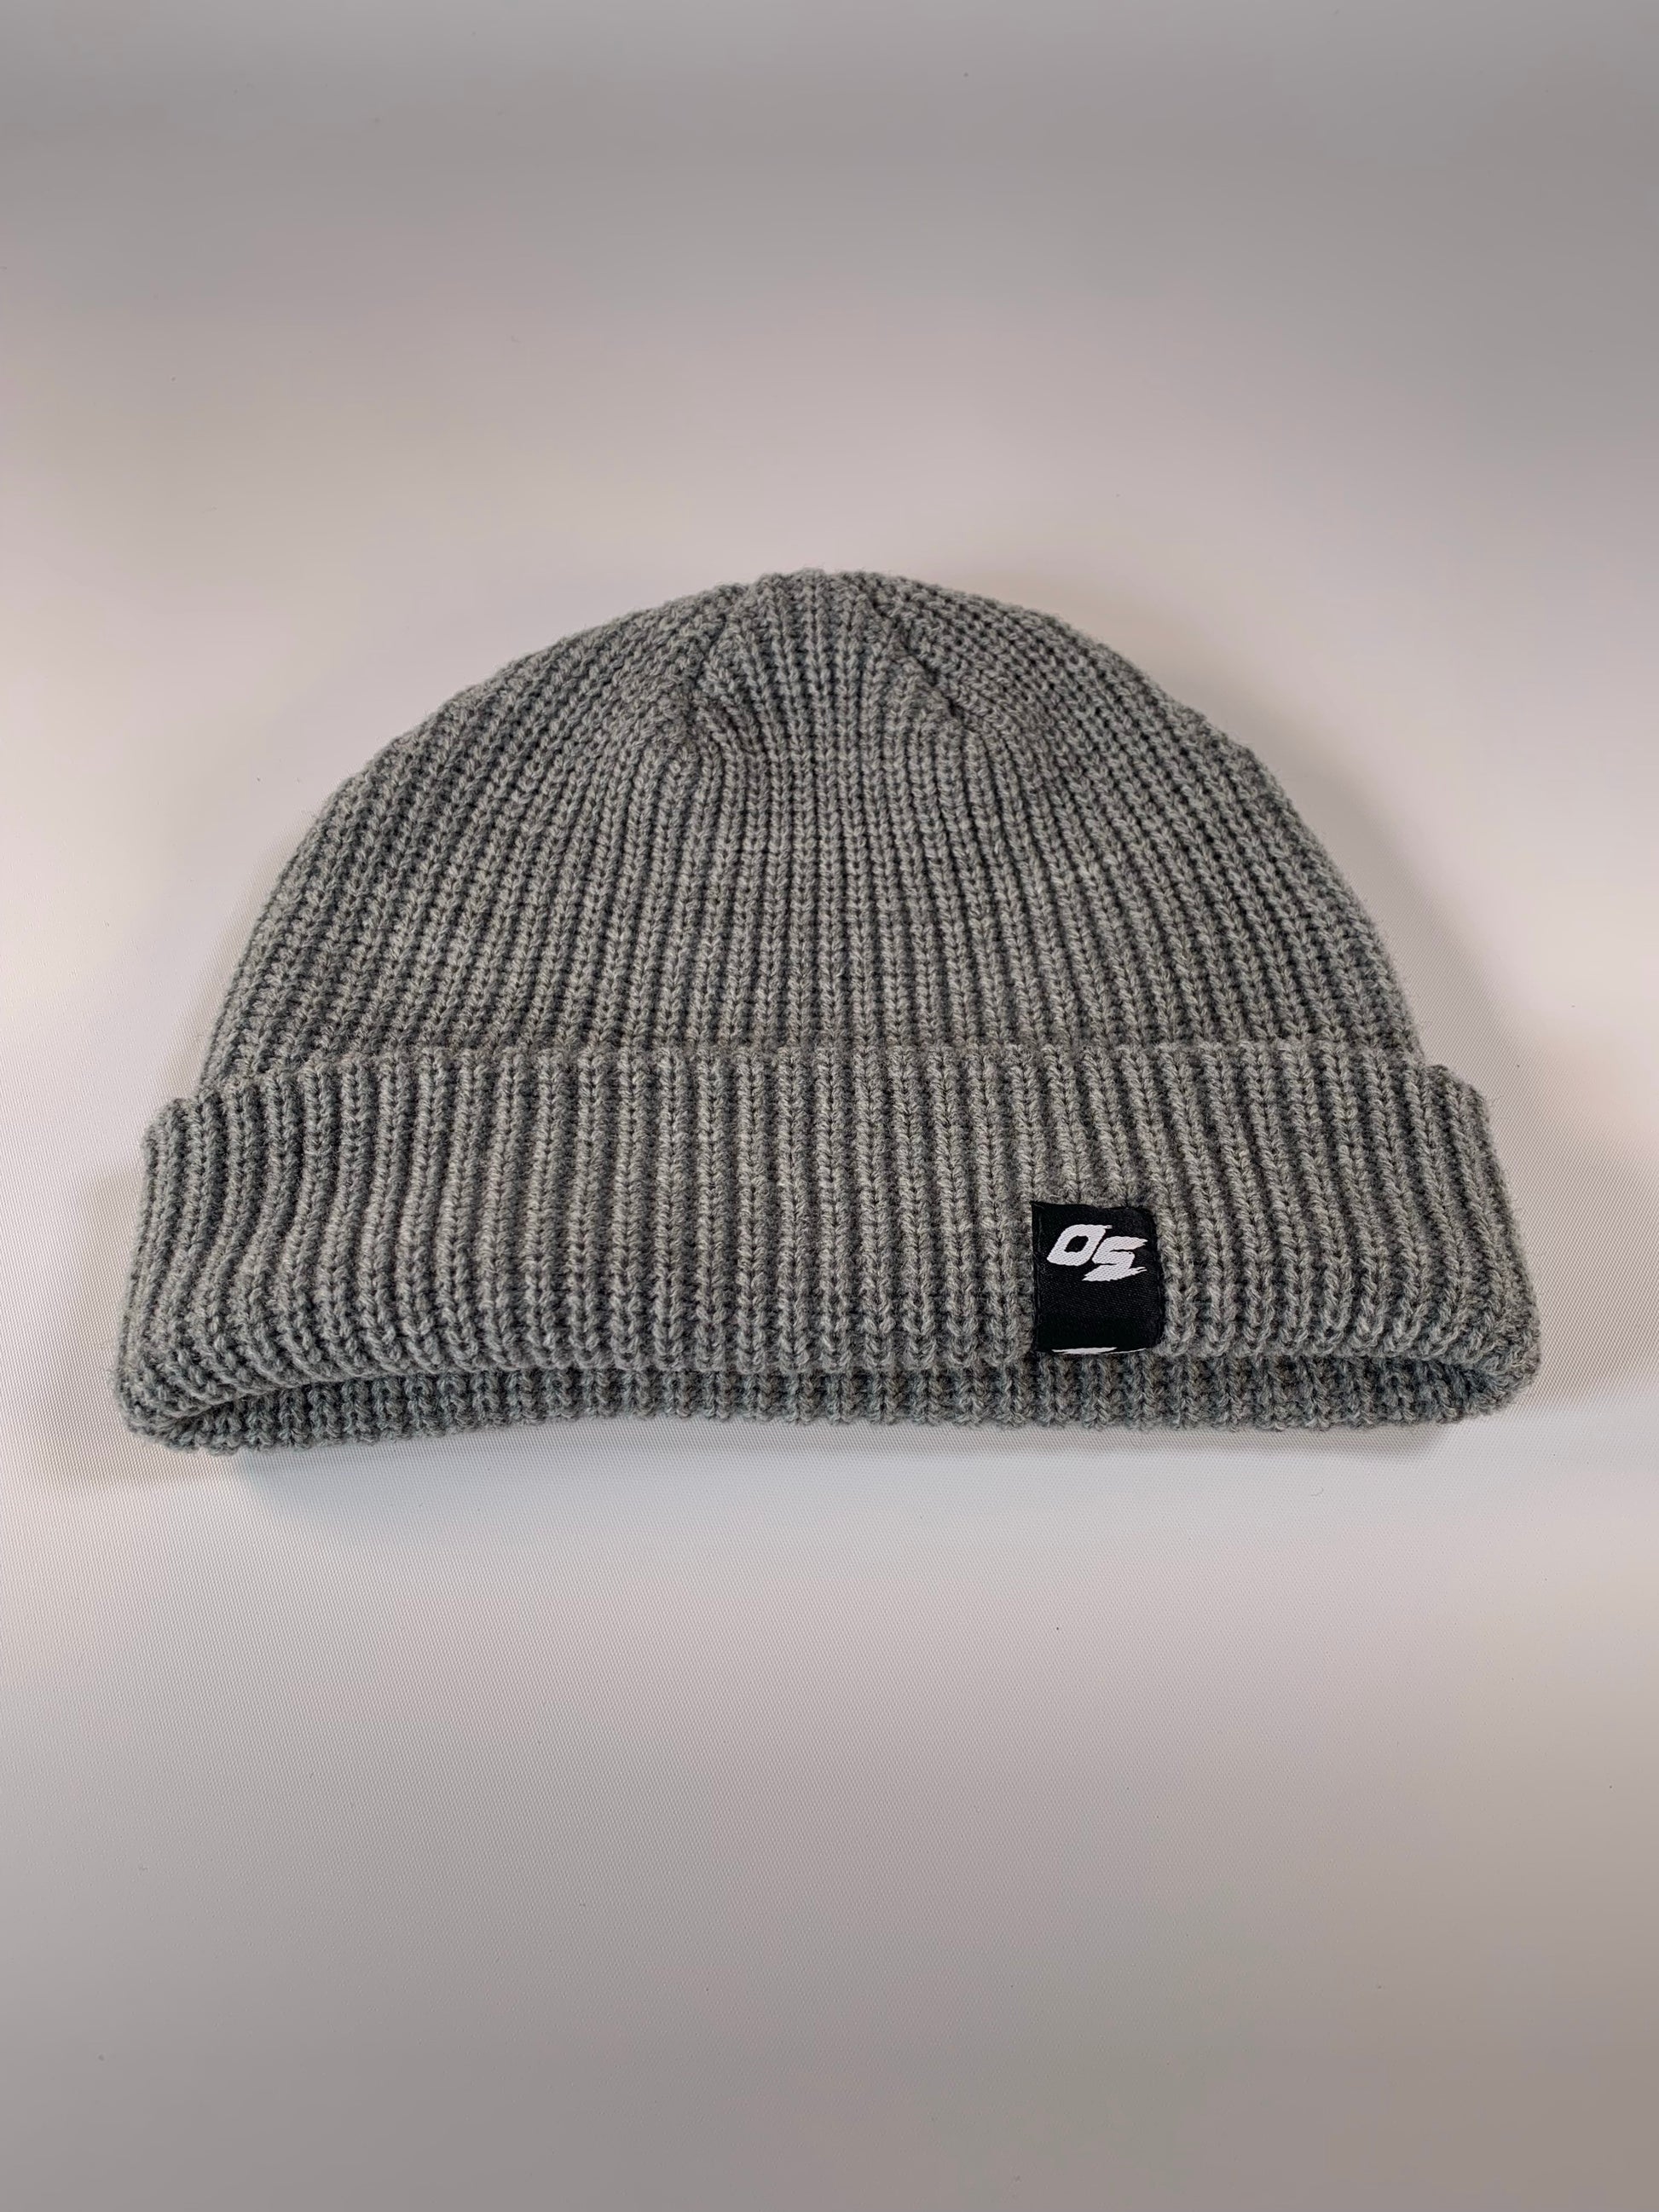 OS® CABLE BEANIE- – grey SPORTS OTSDR